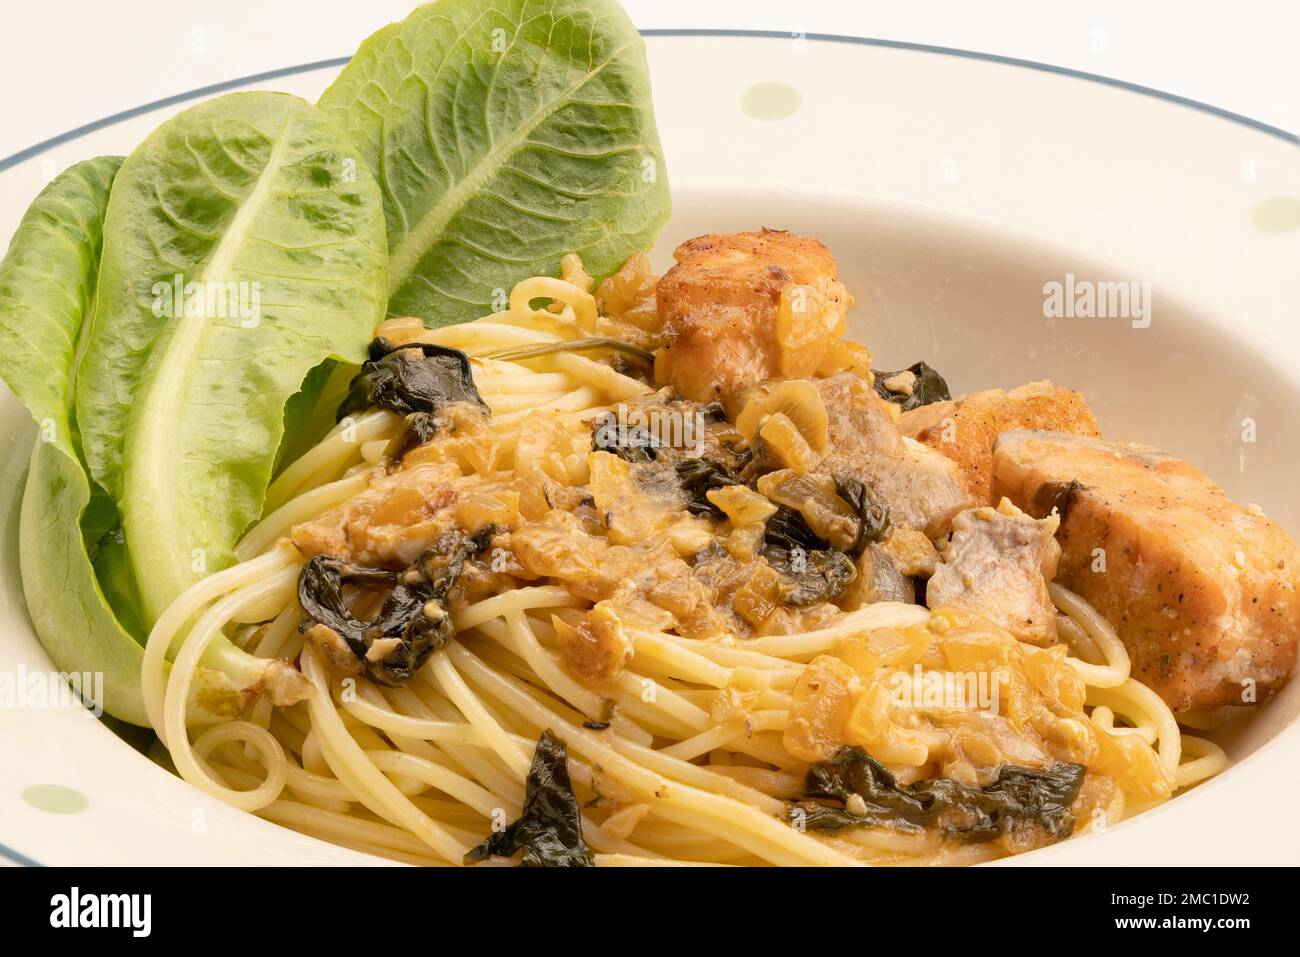 Closeup view of Italian cuisine, homemade creamy spaghetti with spinach, salmon and green vegetables in white ceramic dish on white background Stock Photo